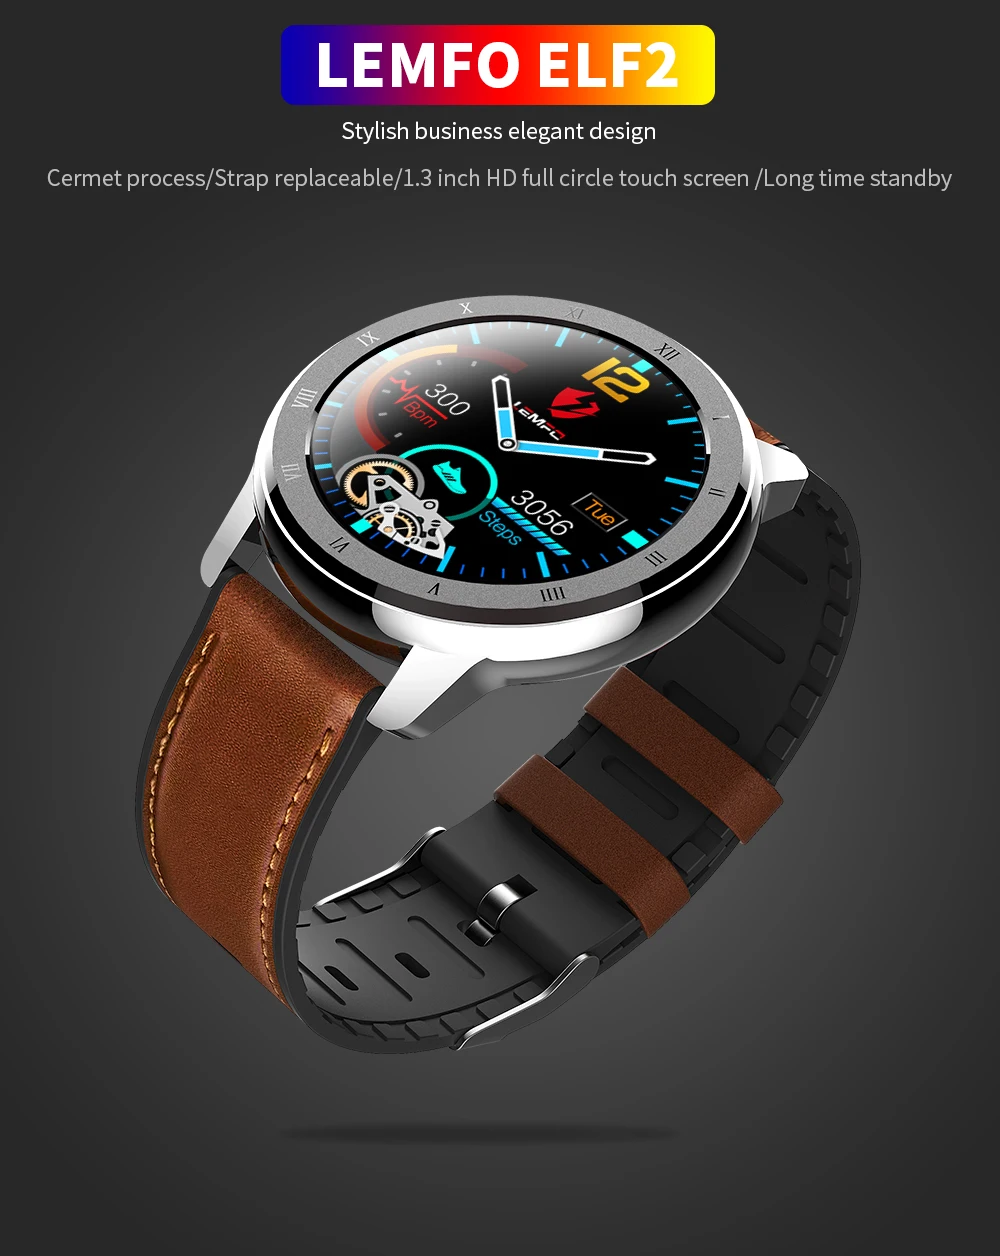 LEMDIOE professional sporty smart watch men blood pressure monitor waterproof ecg ppg smartwatch for android huawei replaceabl